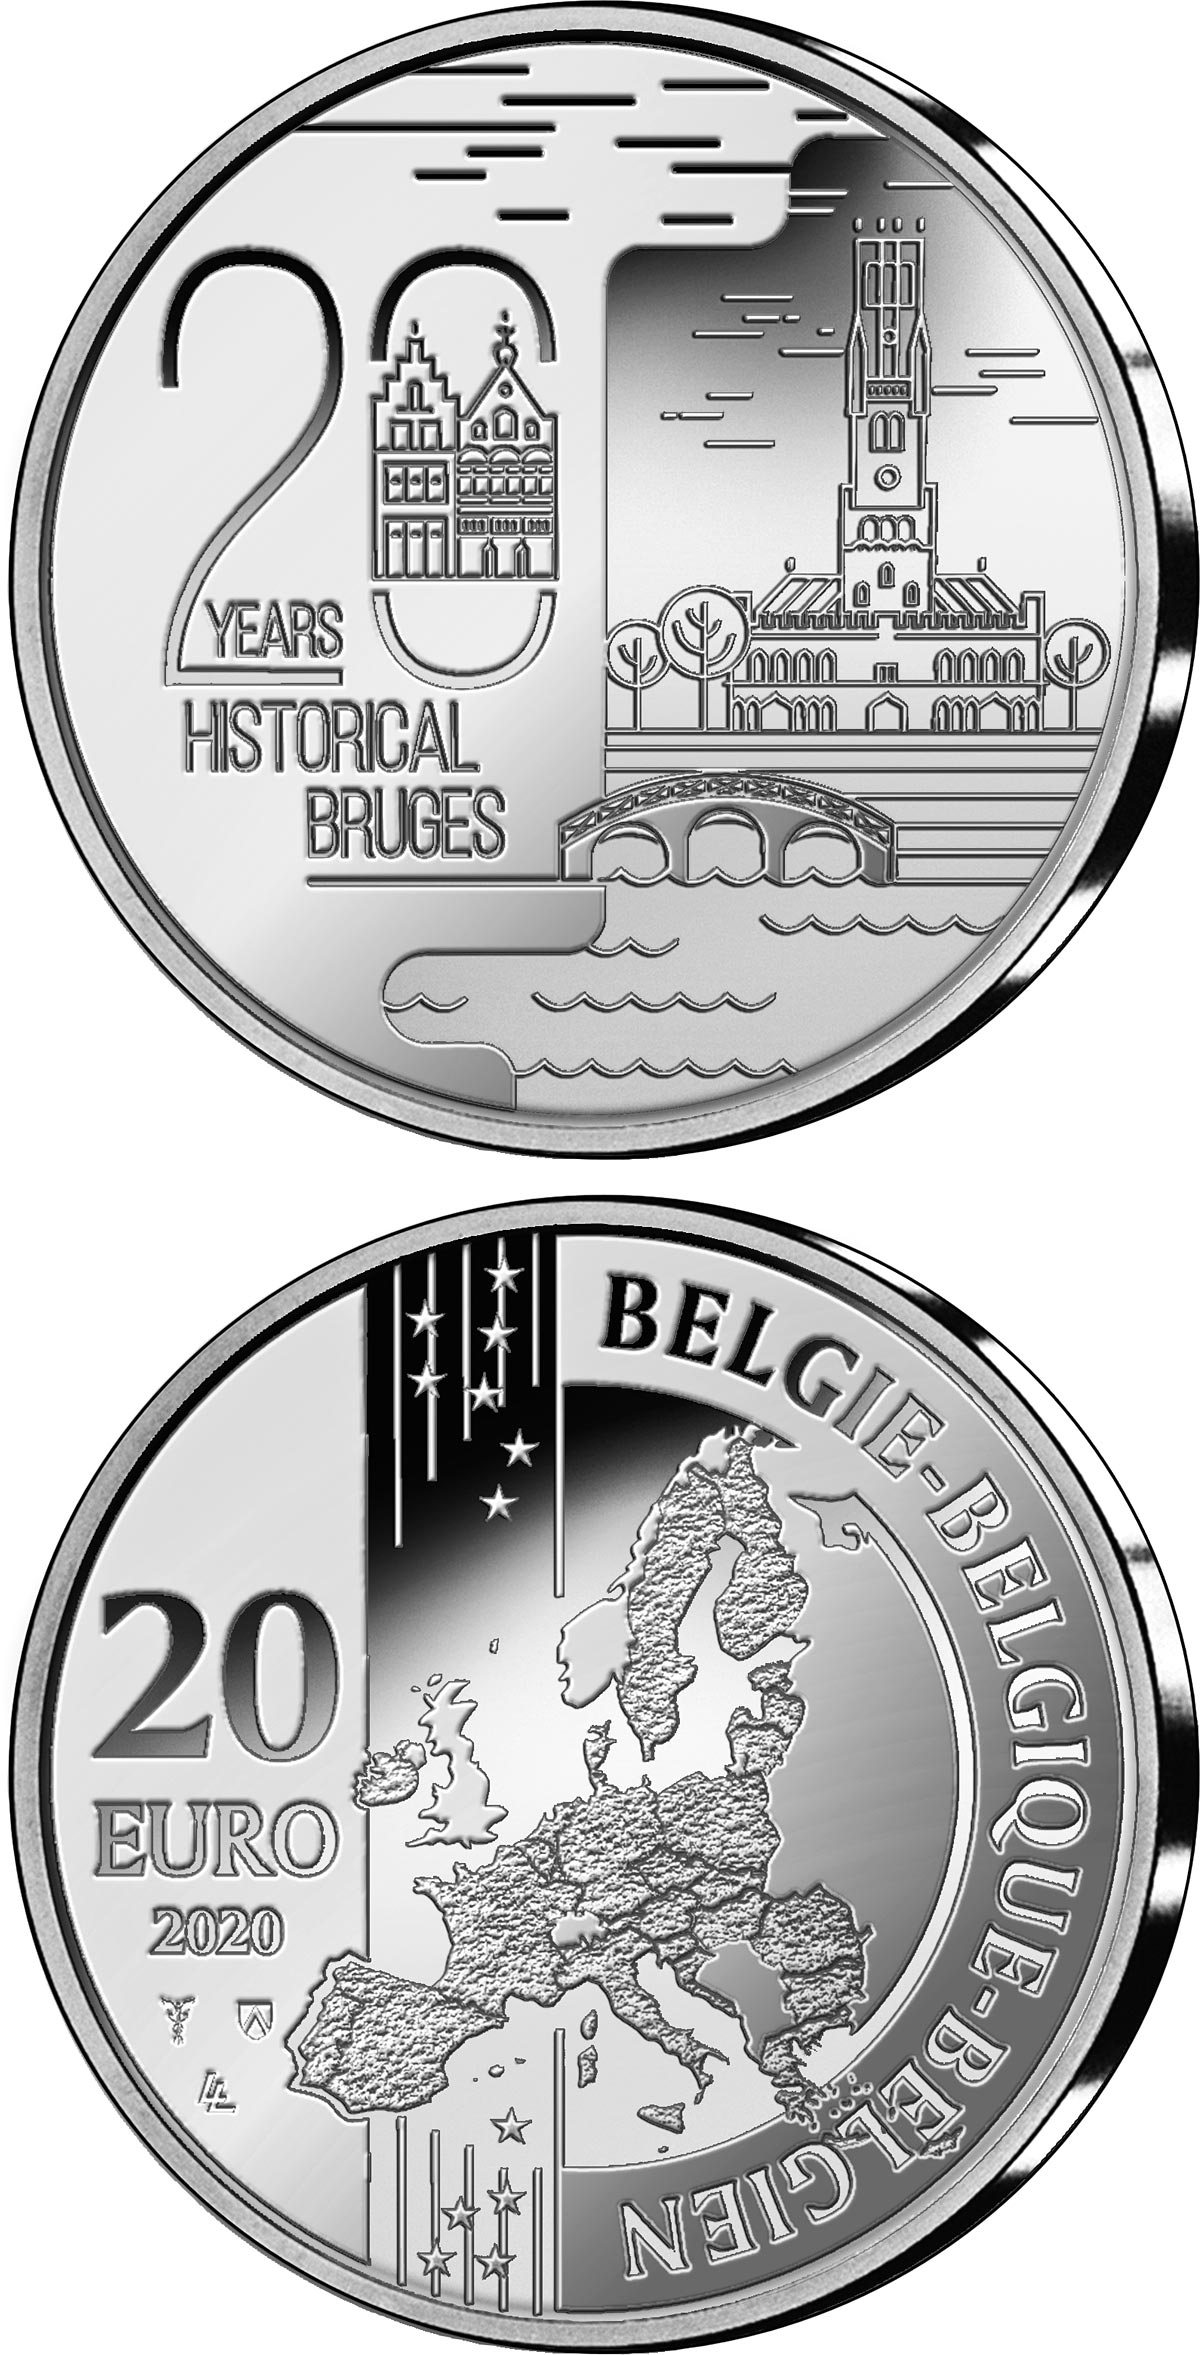 Image of 20 euro coin - 20 Years Historical Bruges | Belgium 2020.  The Silver coin is of Proof quality.